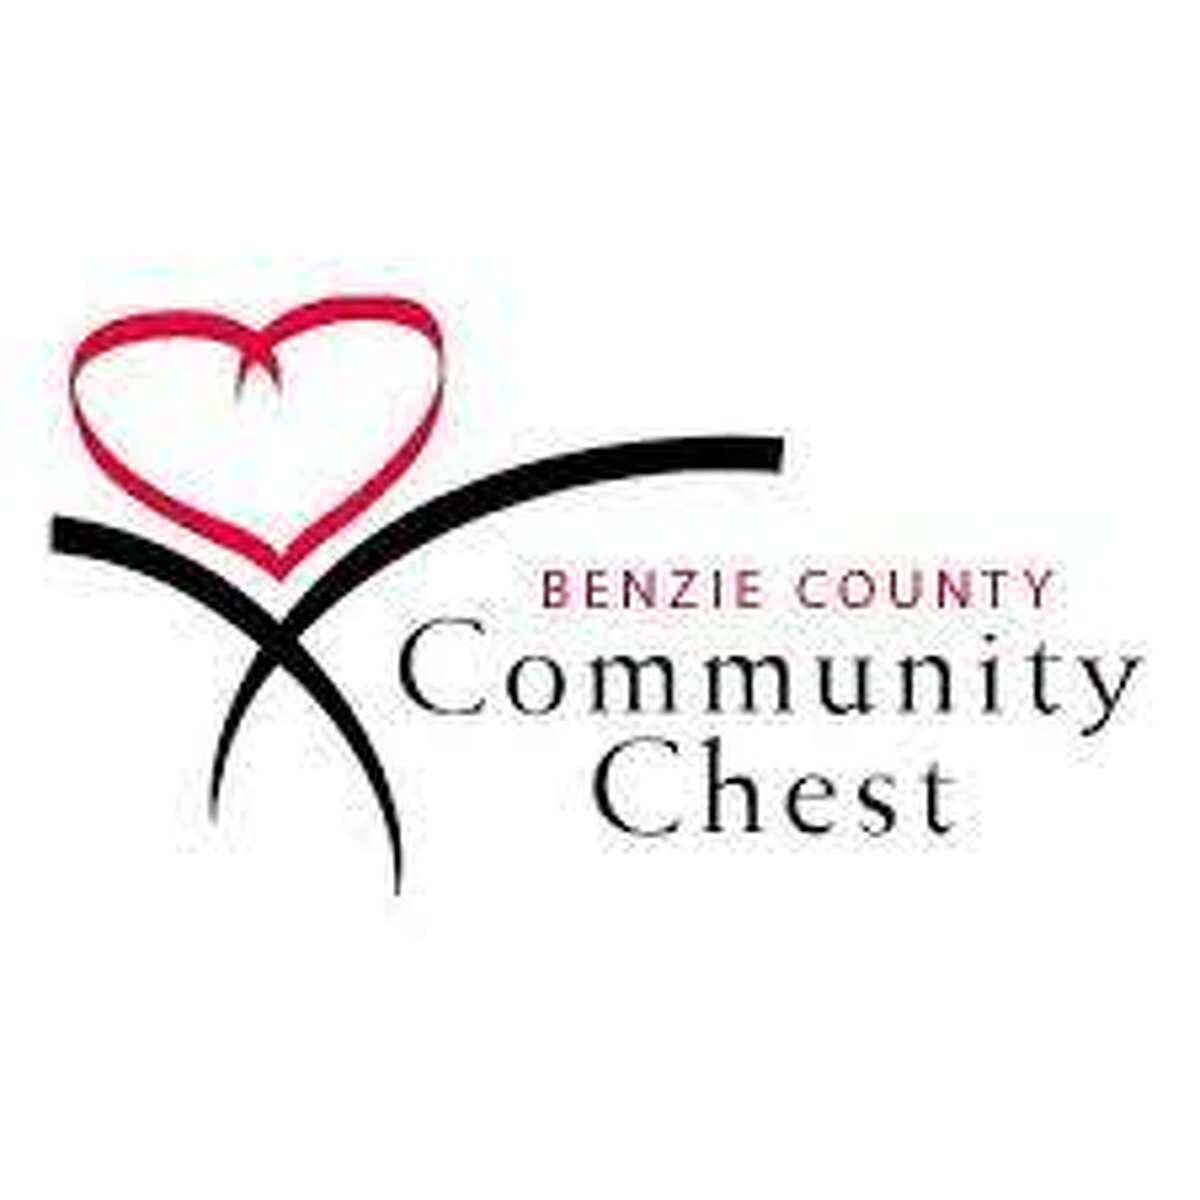 Benzie County Community Chest has announced its 2022 grant recipients. 